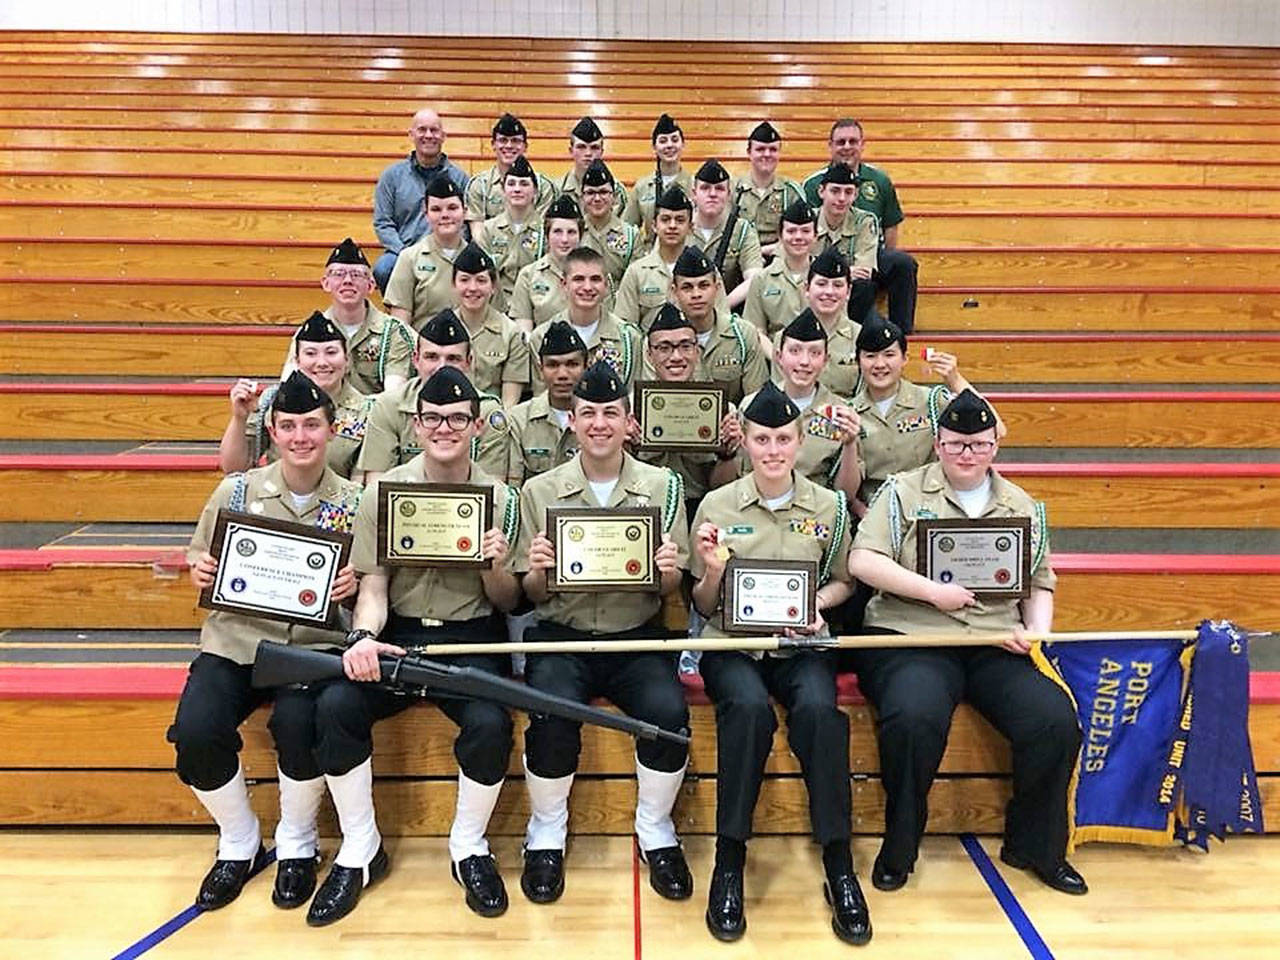 Port Angeles High School Navy Junior Reserve Officers Training Corps Roughriders with their respective awards. (Port Angeles School District)